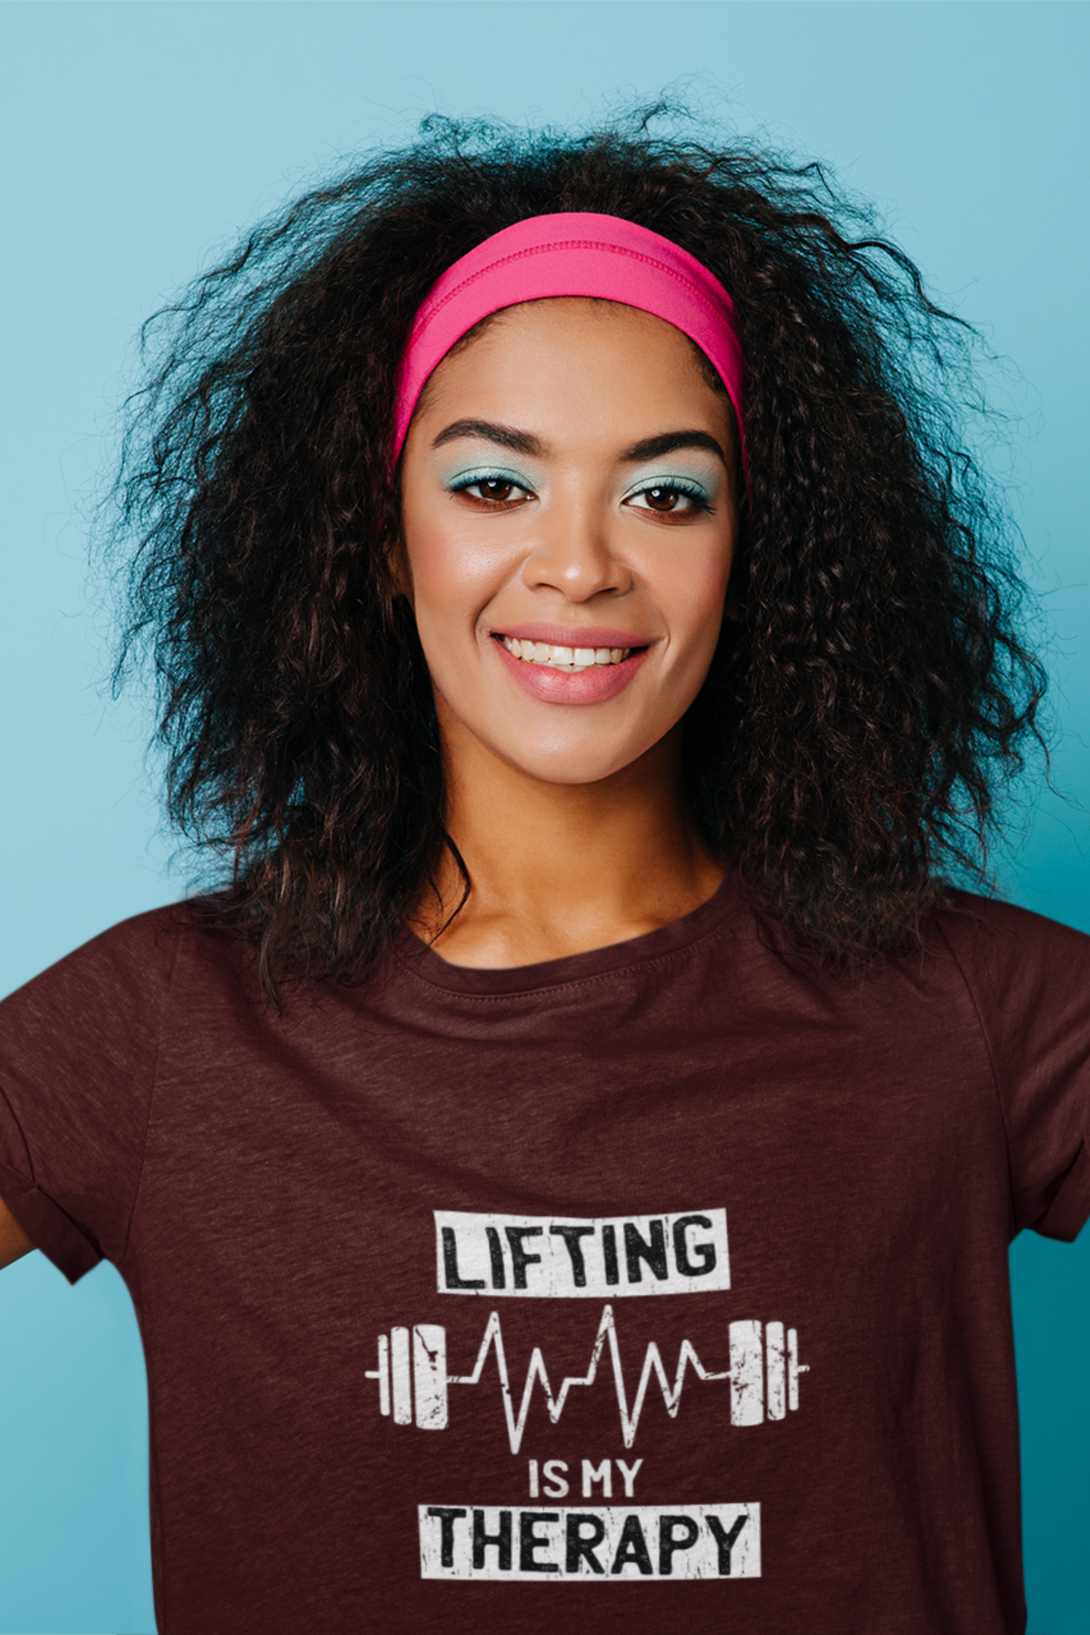 Lifting Is My Therapy Printed T-Shirt For Women - WowWaves - 10